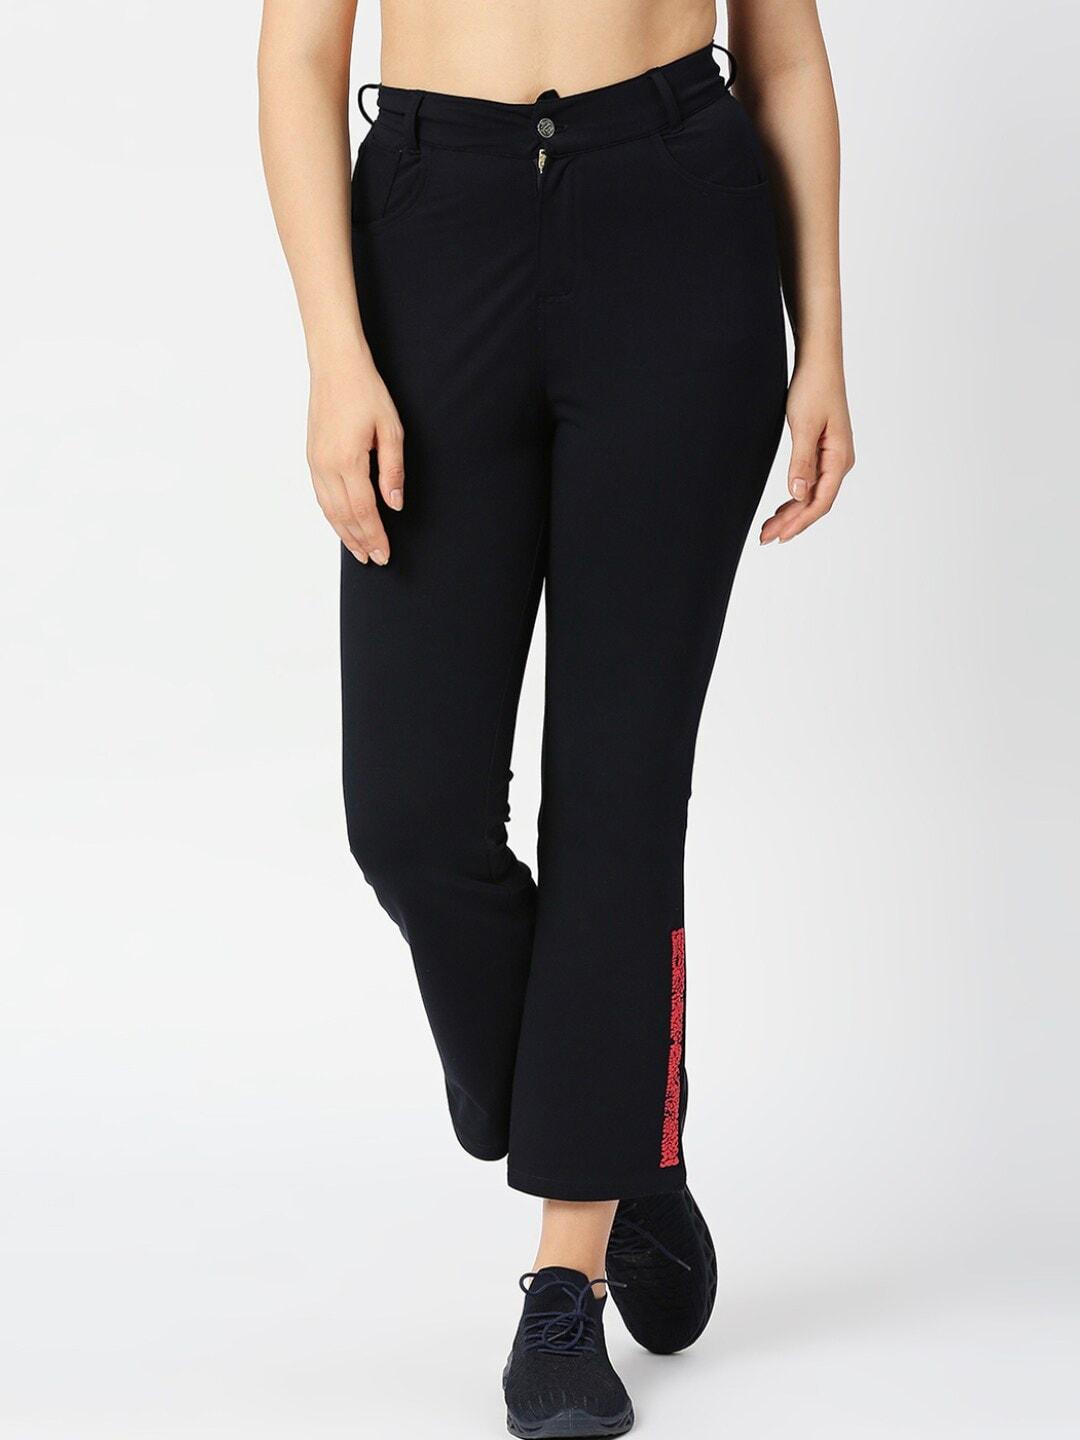 lovable-sport-women-mid-rise-flared-fit-track-pants